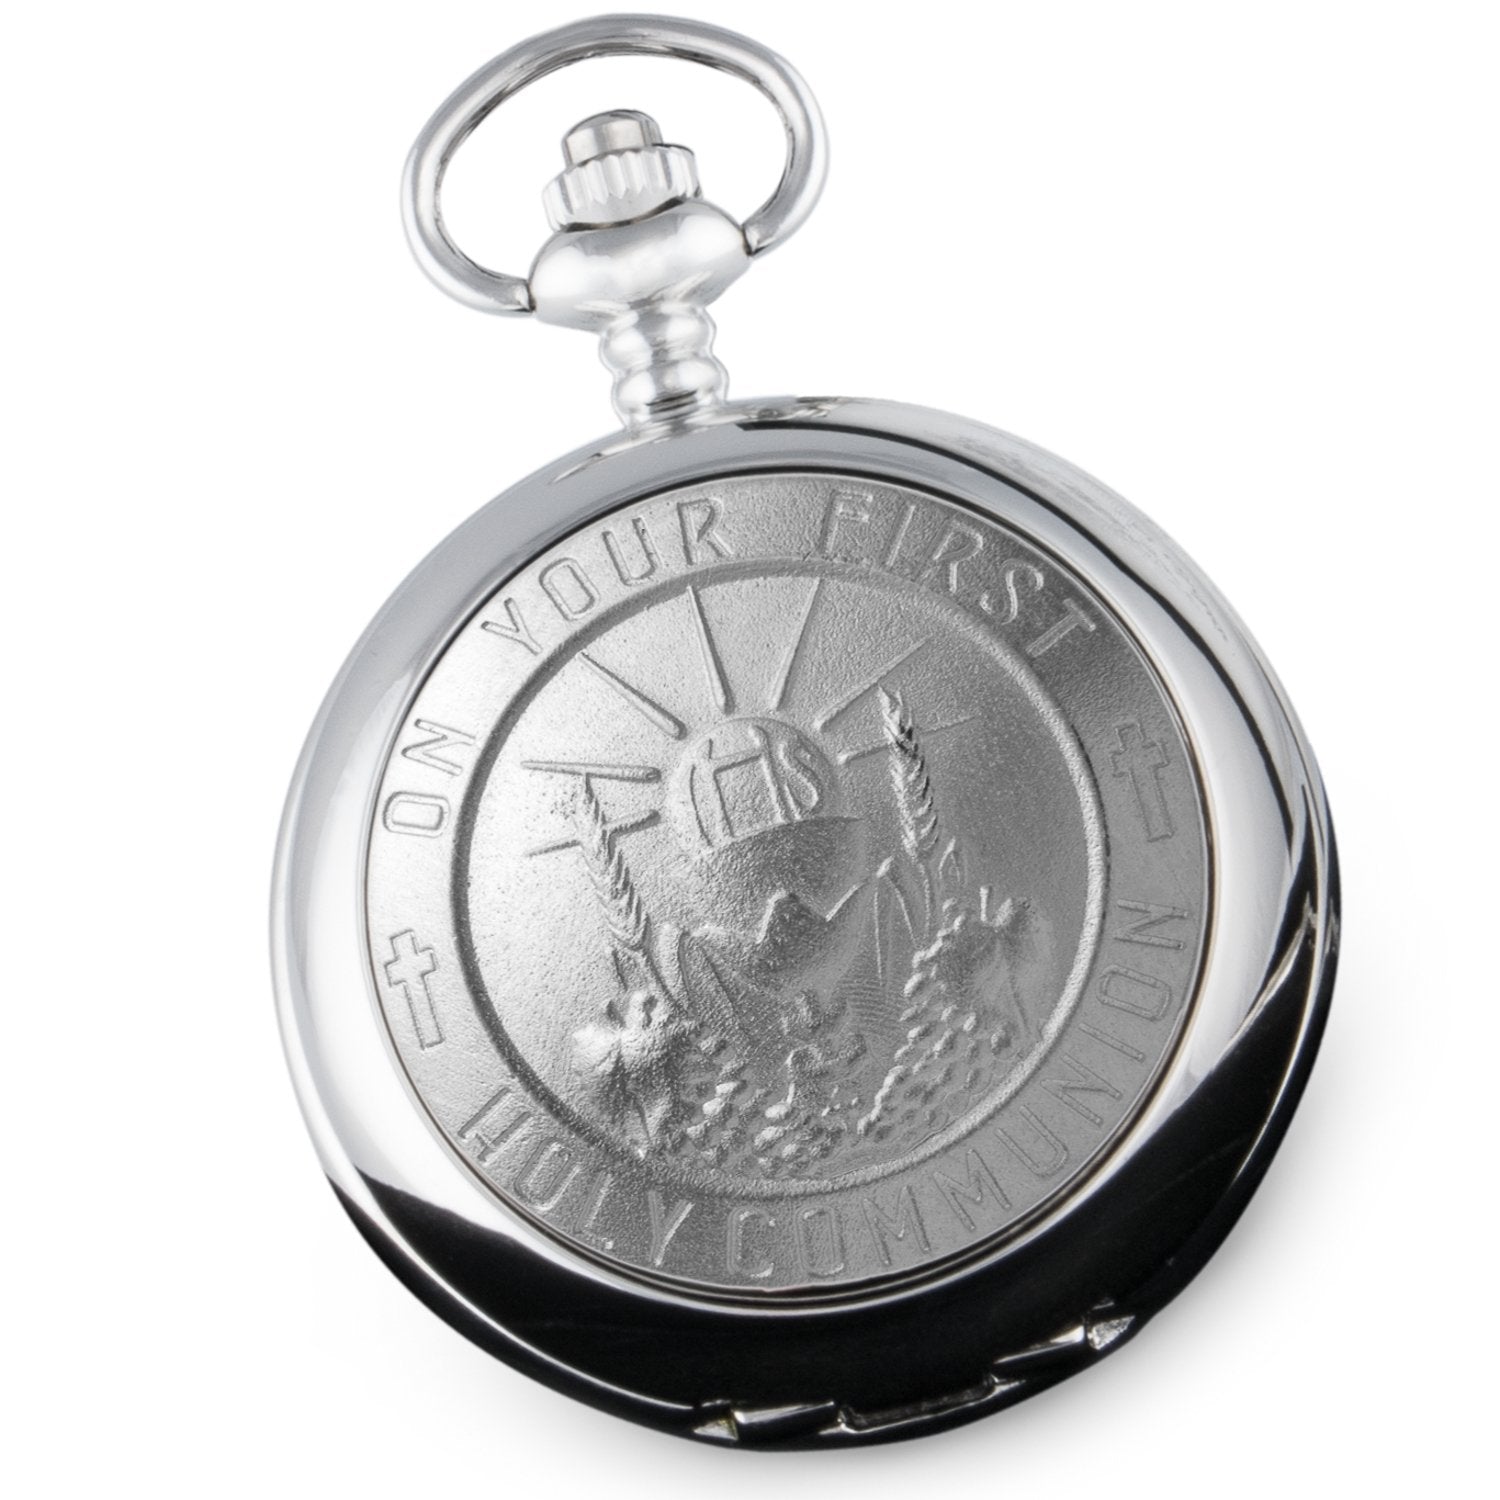 Boy's First Holy Communion Pocket Watch Gift Boys 1st Communion Gifts